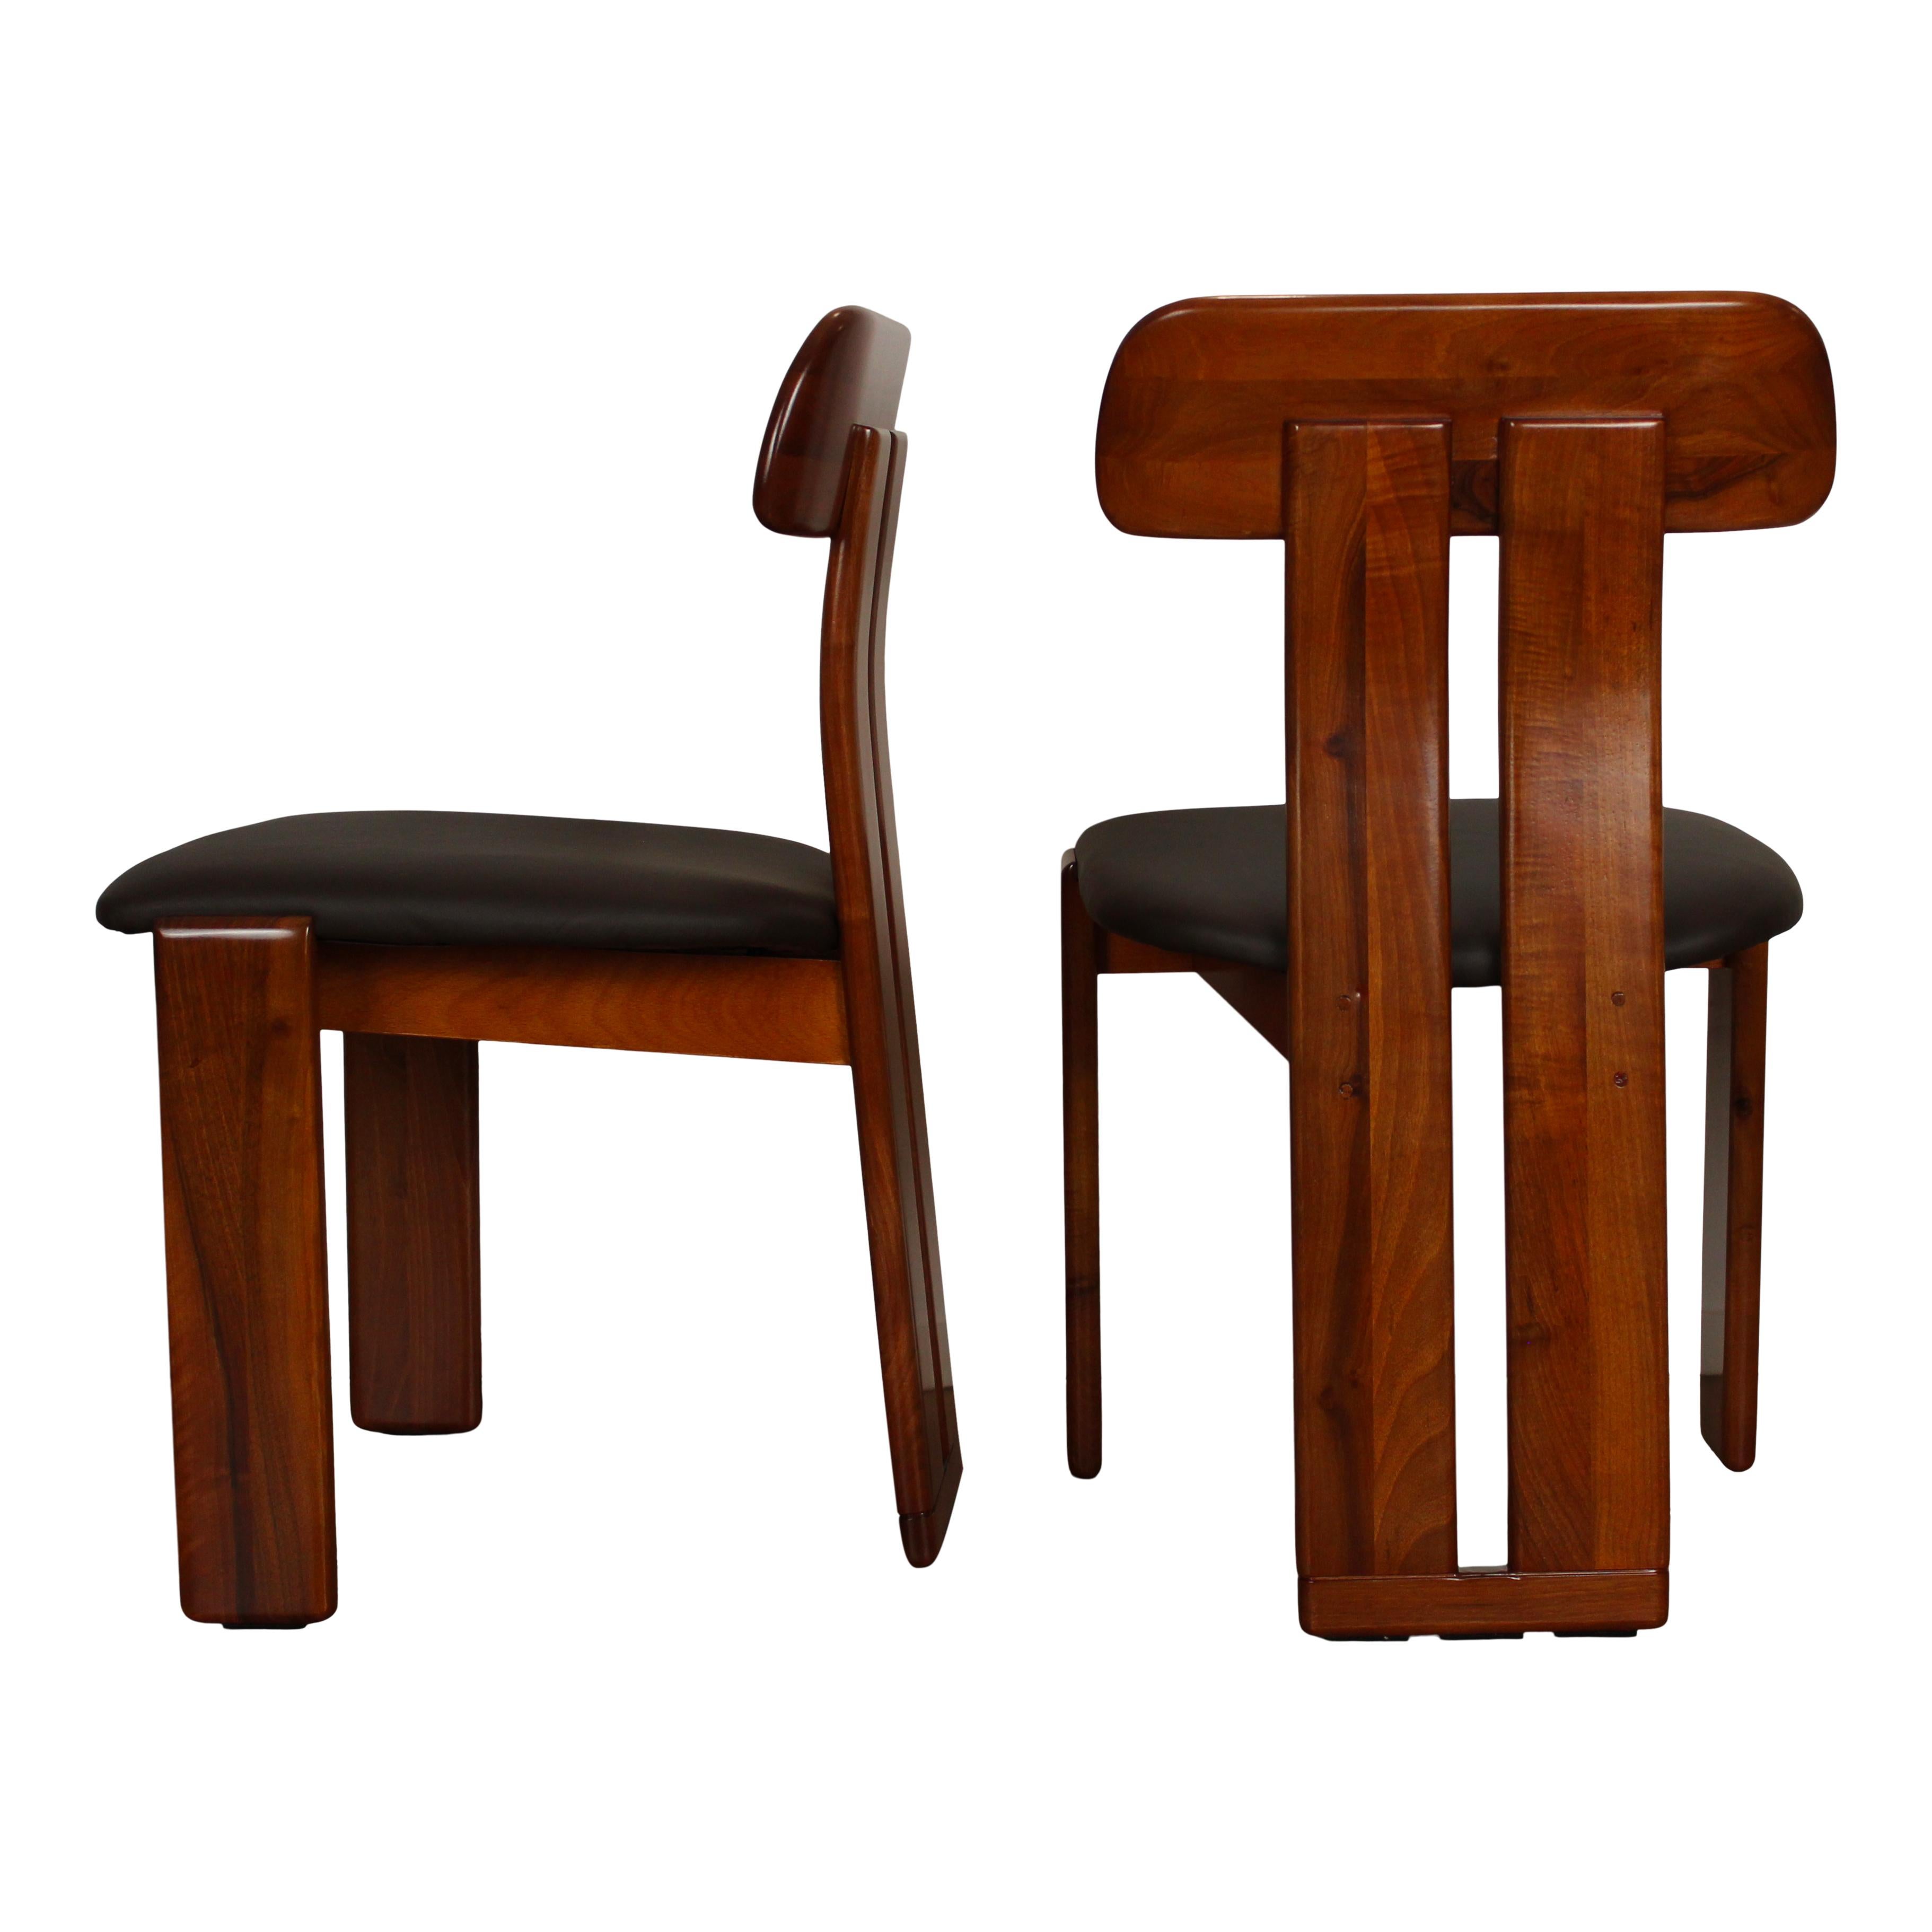 Late 20th Century Mario Marenco Walnut Sapporo Dining Chairs for Mobilgirgi, 1970s, Set of 8 For Sale